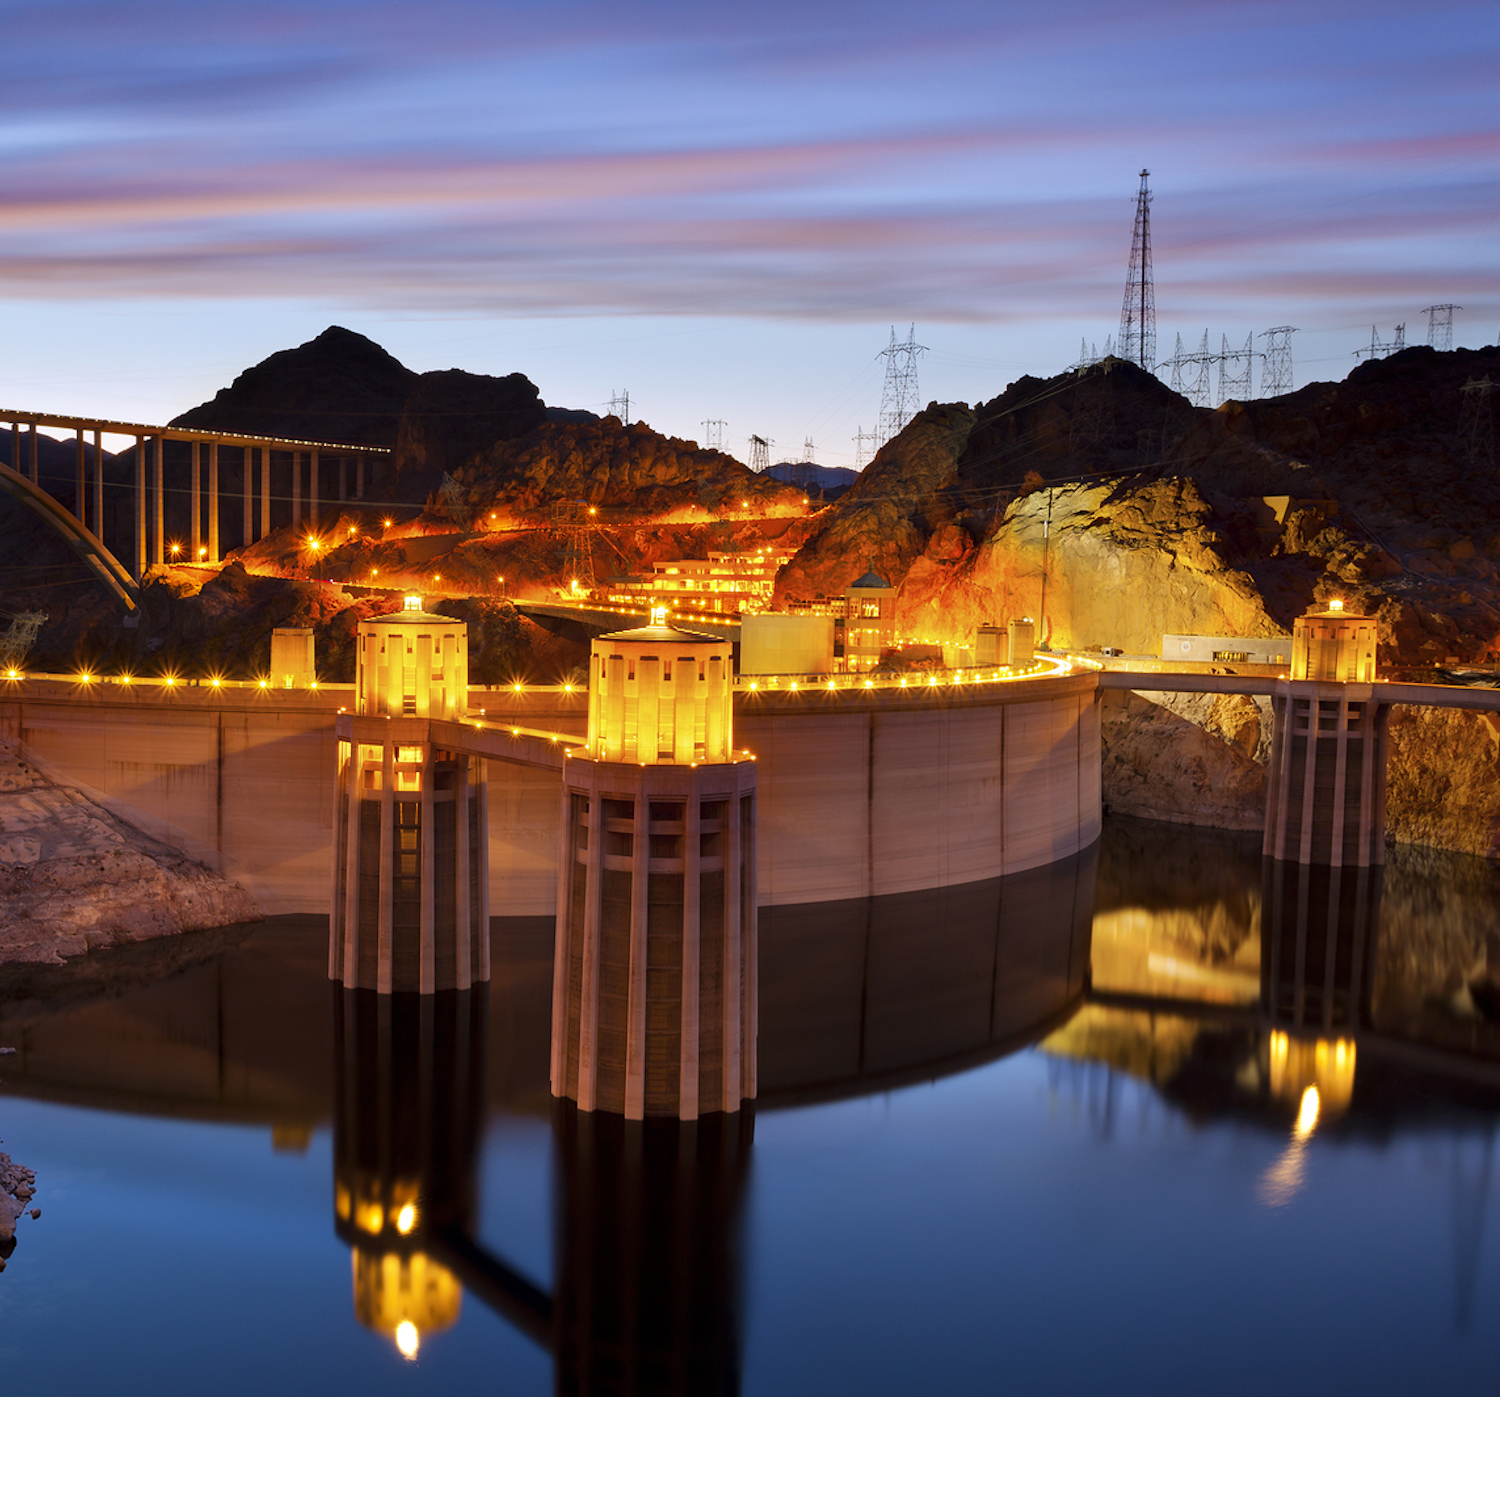 A photograph of a hydroelectric dam at night.